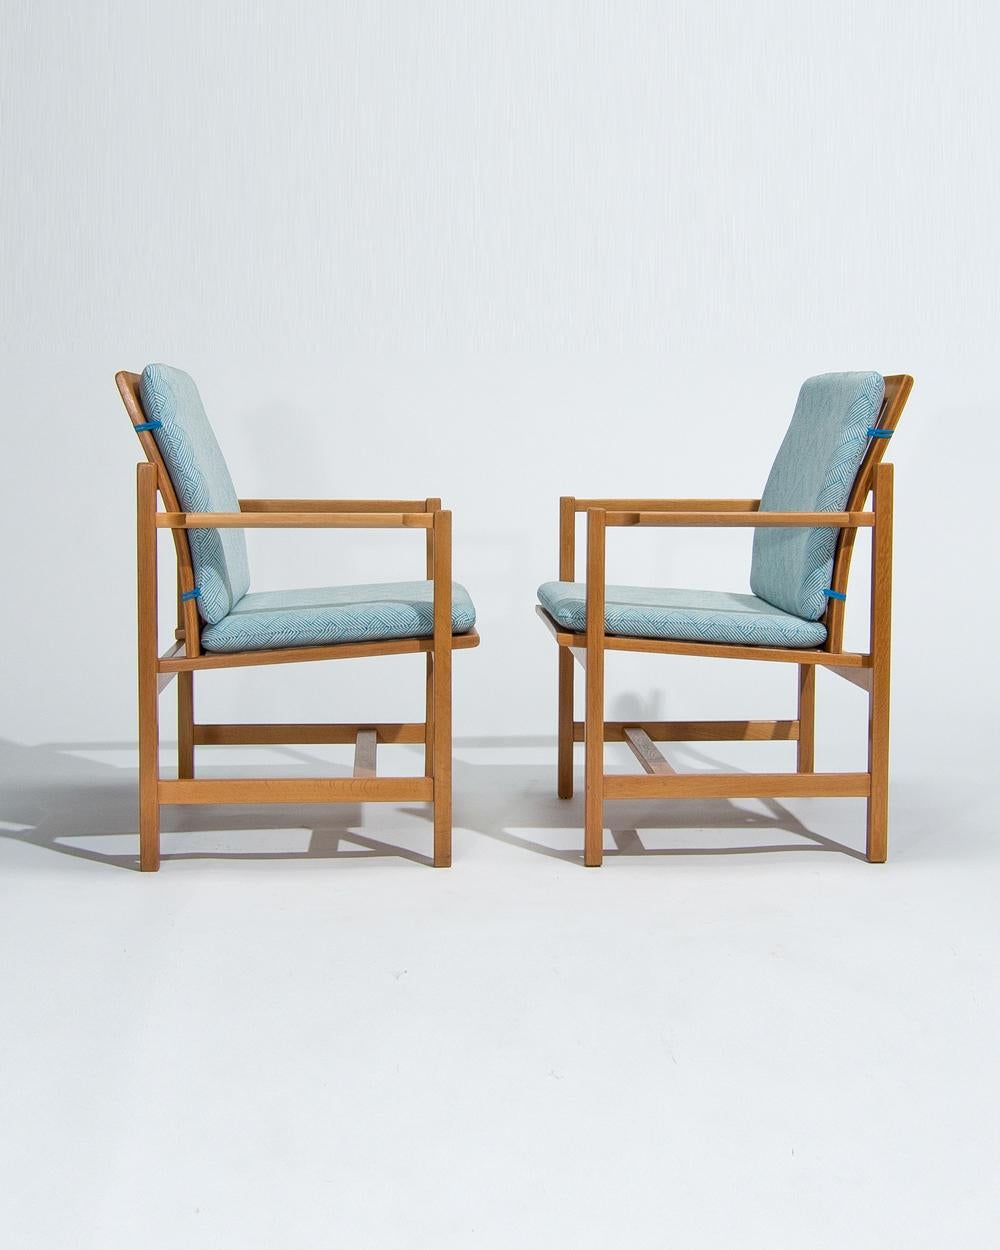 An attractive pair of mid century Danish armchairs designed by Borge Mogensen for Fredericia Stolefabrik in the 1960’s.  Beautifully crafted in Denmark the oak has lovely colour and patina and is complemented nicely by the new cushions in a Colefax